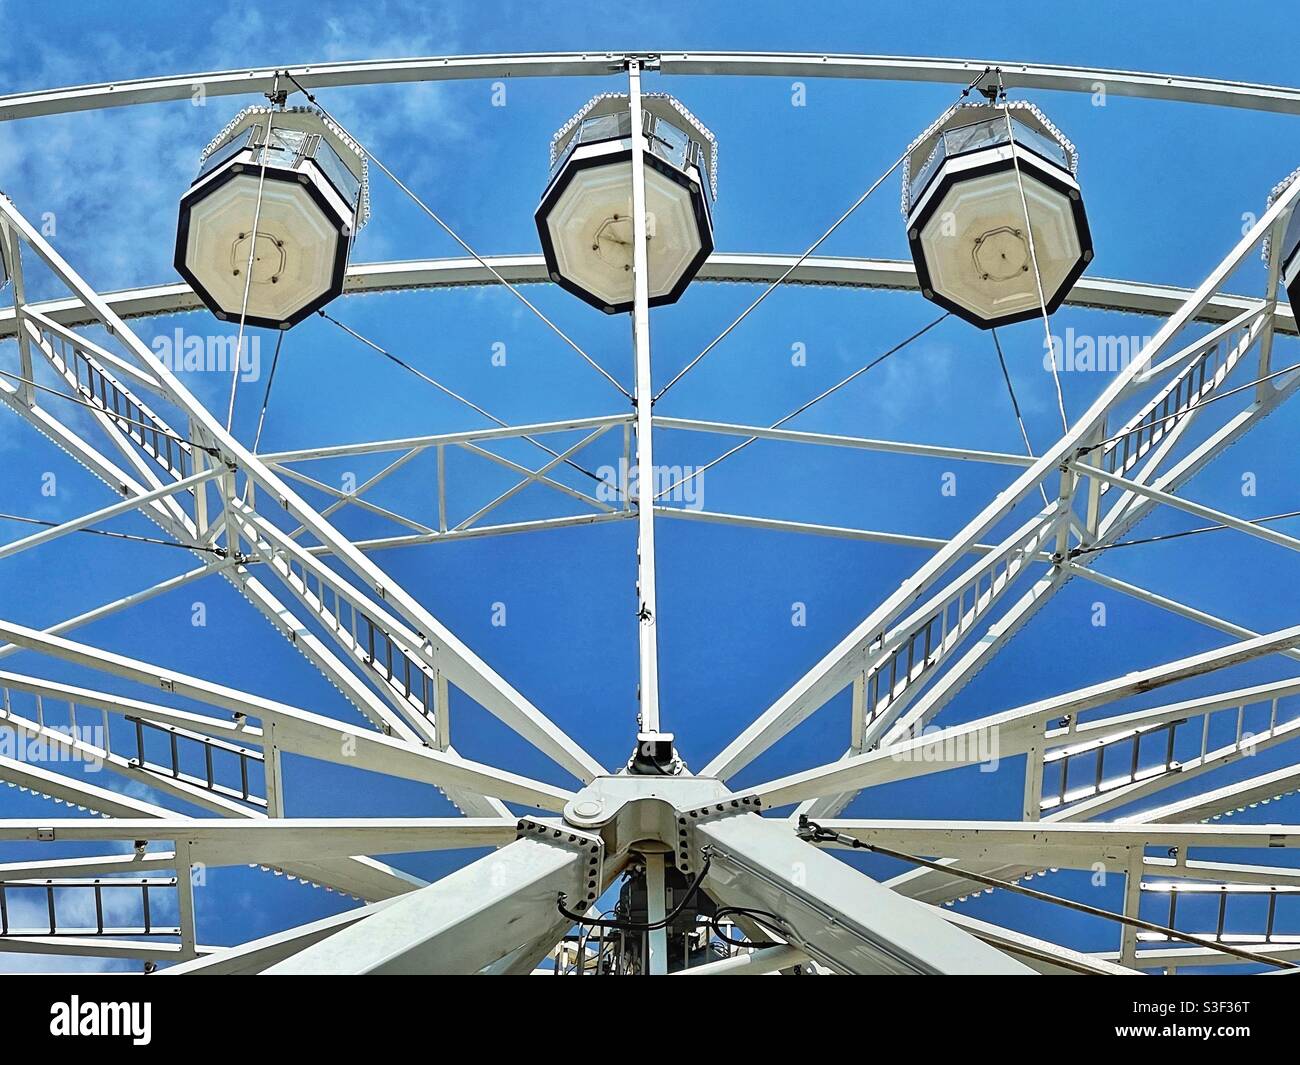 Capsules on the top of a giant Ferris wheel against a deep blue sky. No people. Stock Photo